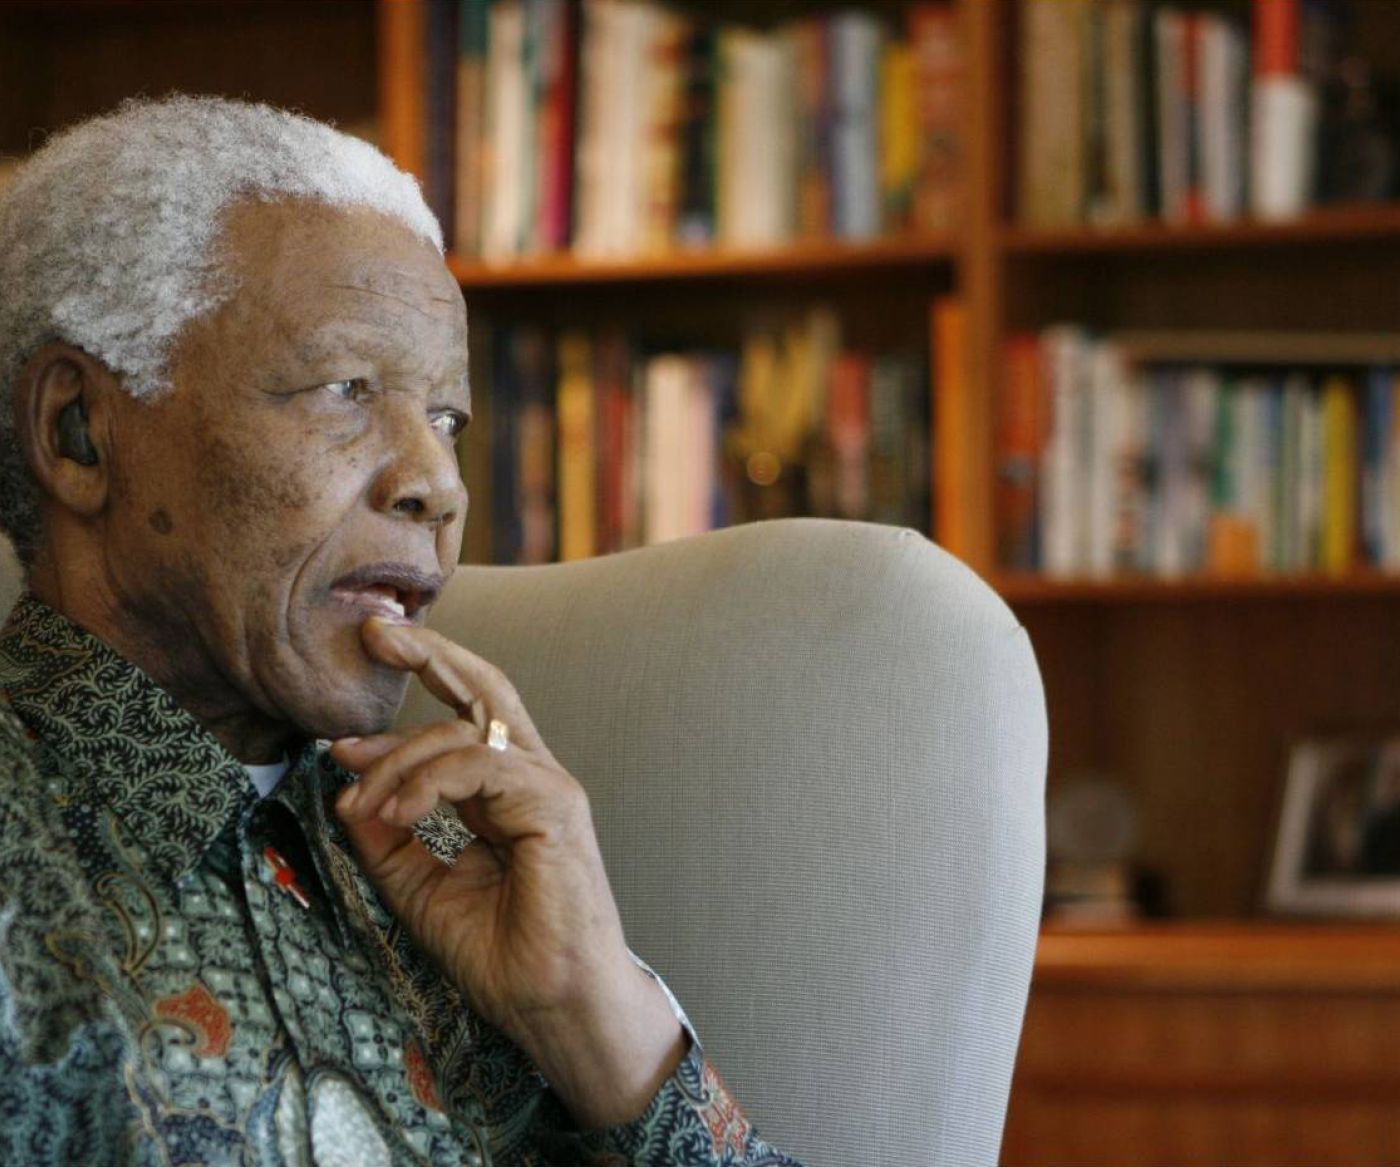 biography of nelson mandela from birth to death